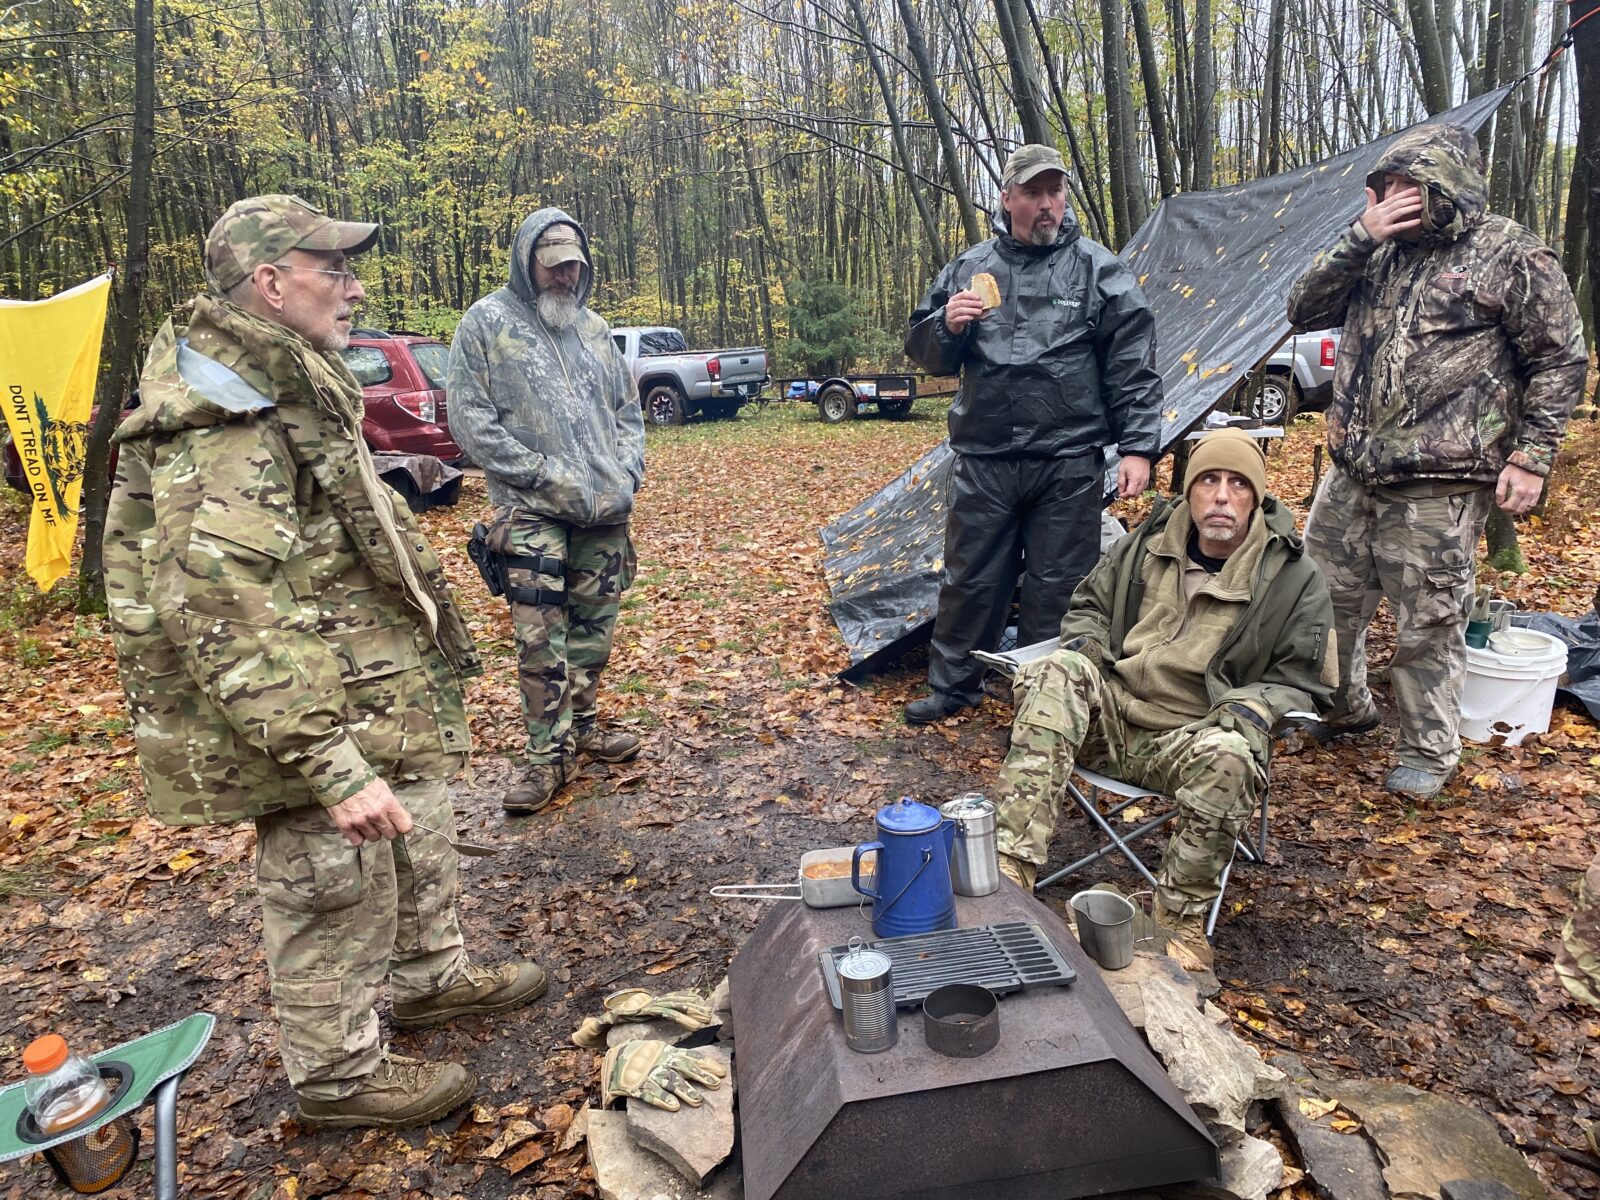 Pennsylvania Volunteer Militia members sit around a fire during a rainy militia training weekend. Militia groups have been increasingly active in recent years, showing up to protests, anti-lockdown rallies and even getting into electoral politics.